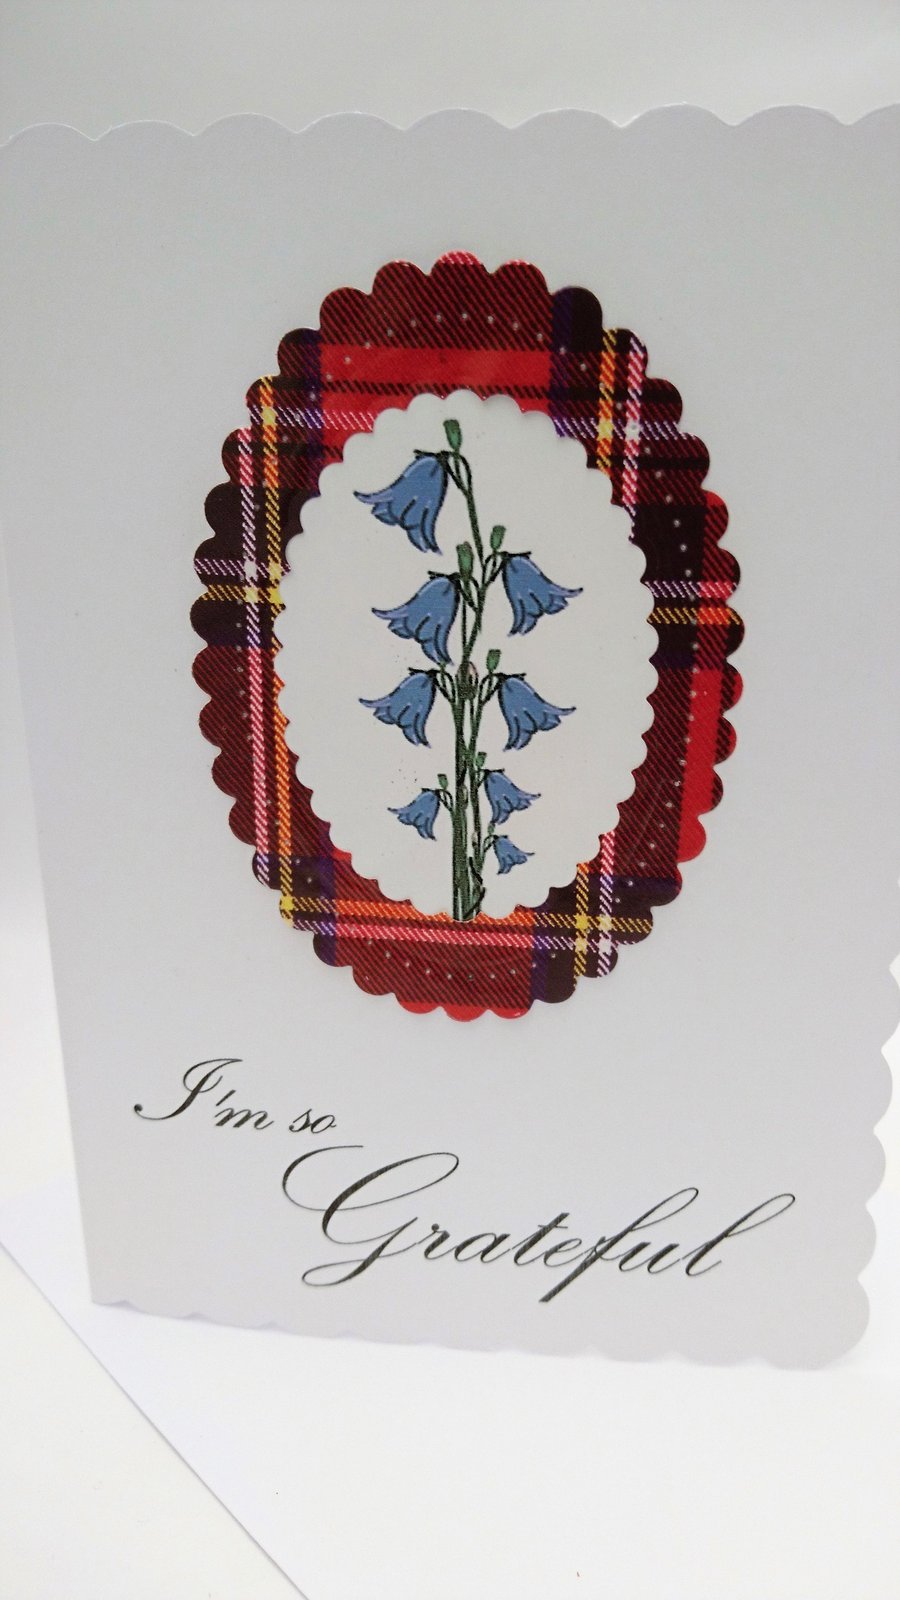 Scottish Gratitude Card,Special Thank You with twofold purpose FREE P&P to UK